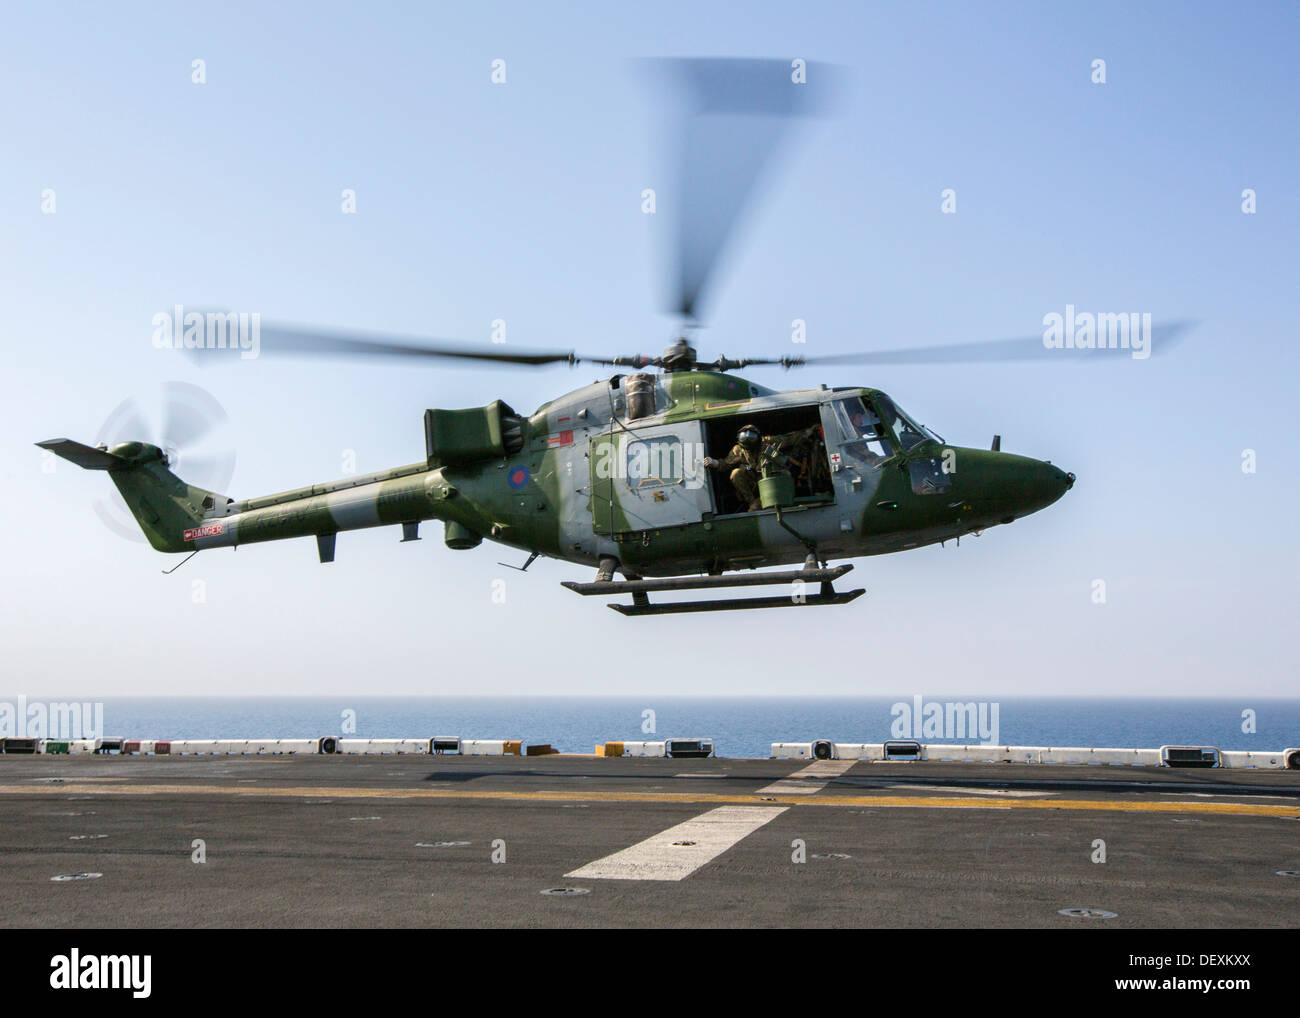 United Kingdom Army Air Corps Westland Lynx battlefield helicopter lands on the flight deck of the amphibious assault ship USS Kearsarge (LHD 3). Kearsarge is the flagship for the Kearsarge Amphibious Ready Group and, with the embarked 26th Marine Expedit Stock Photo